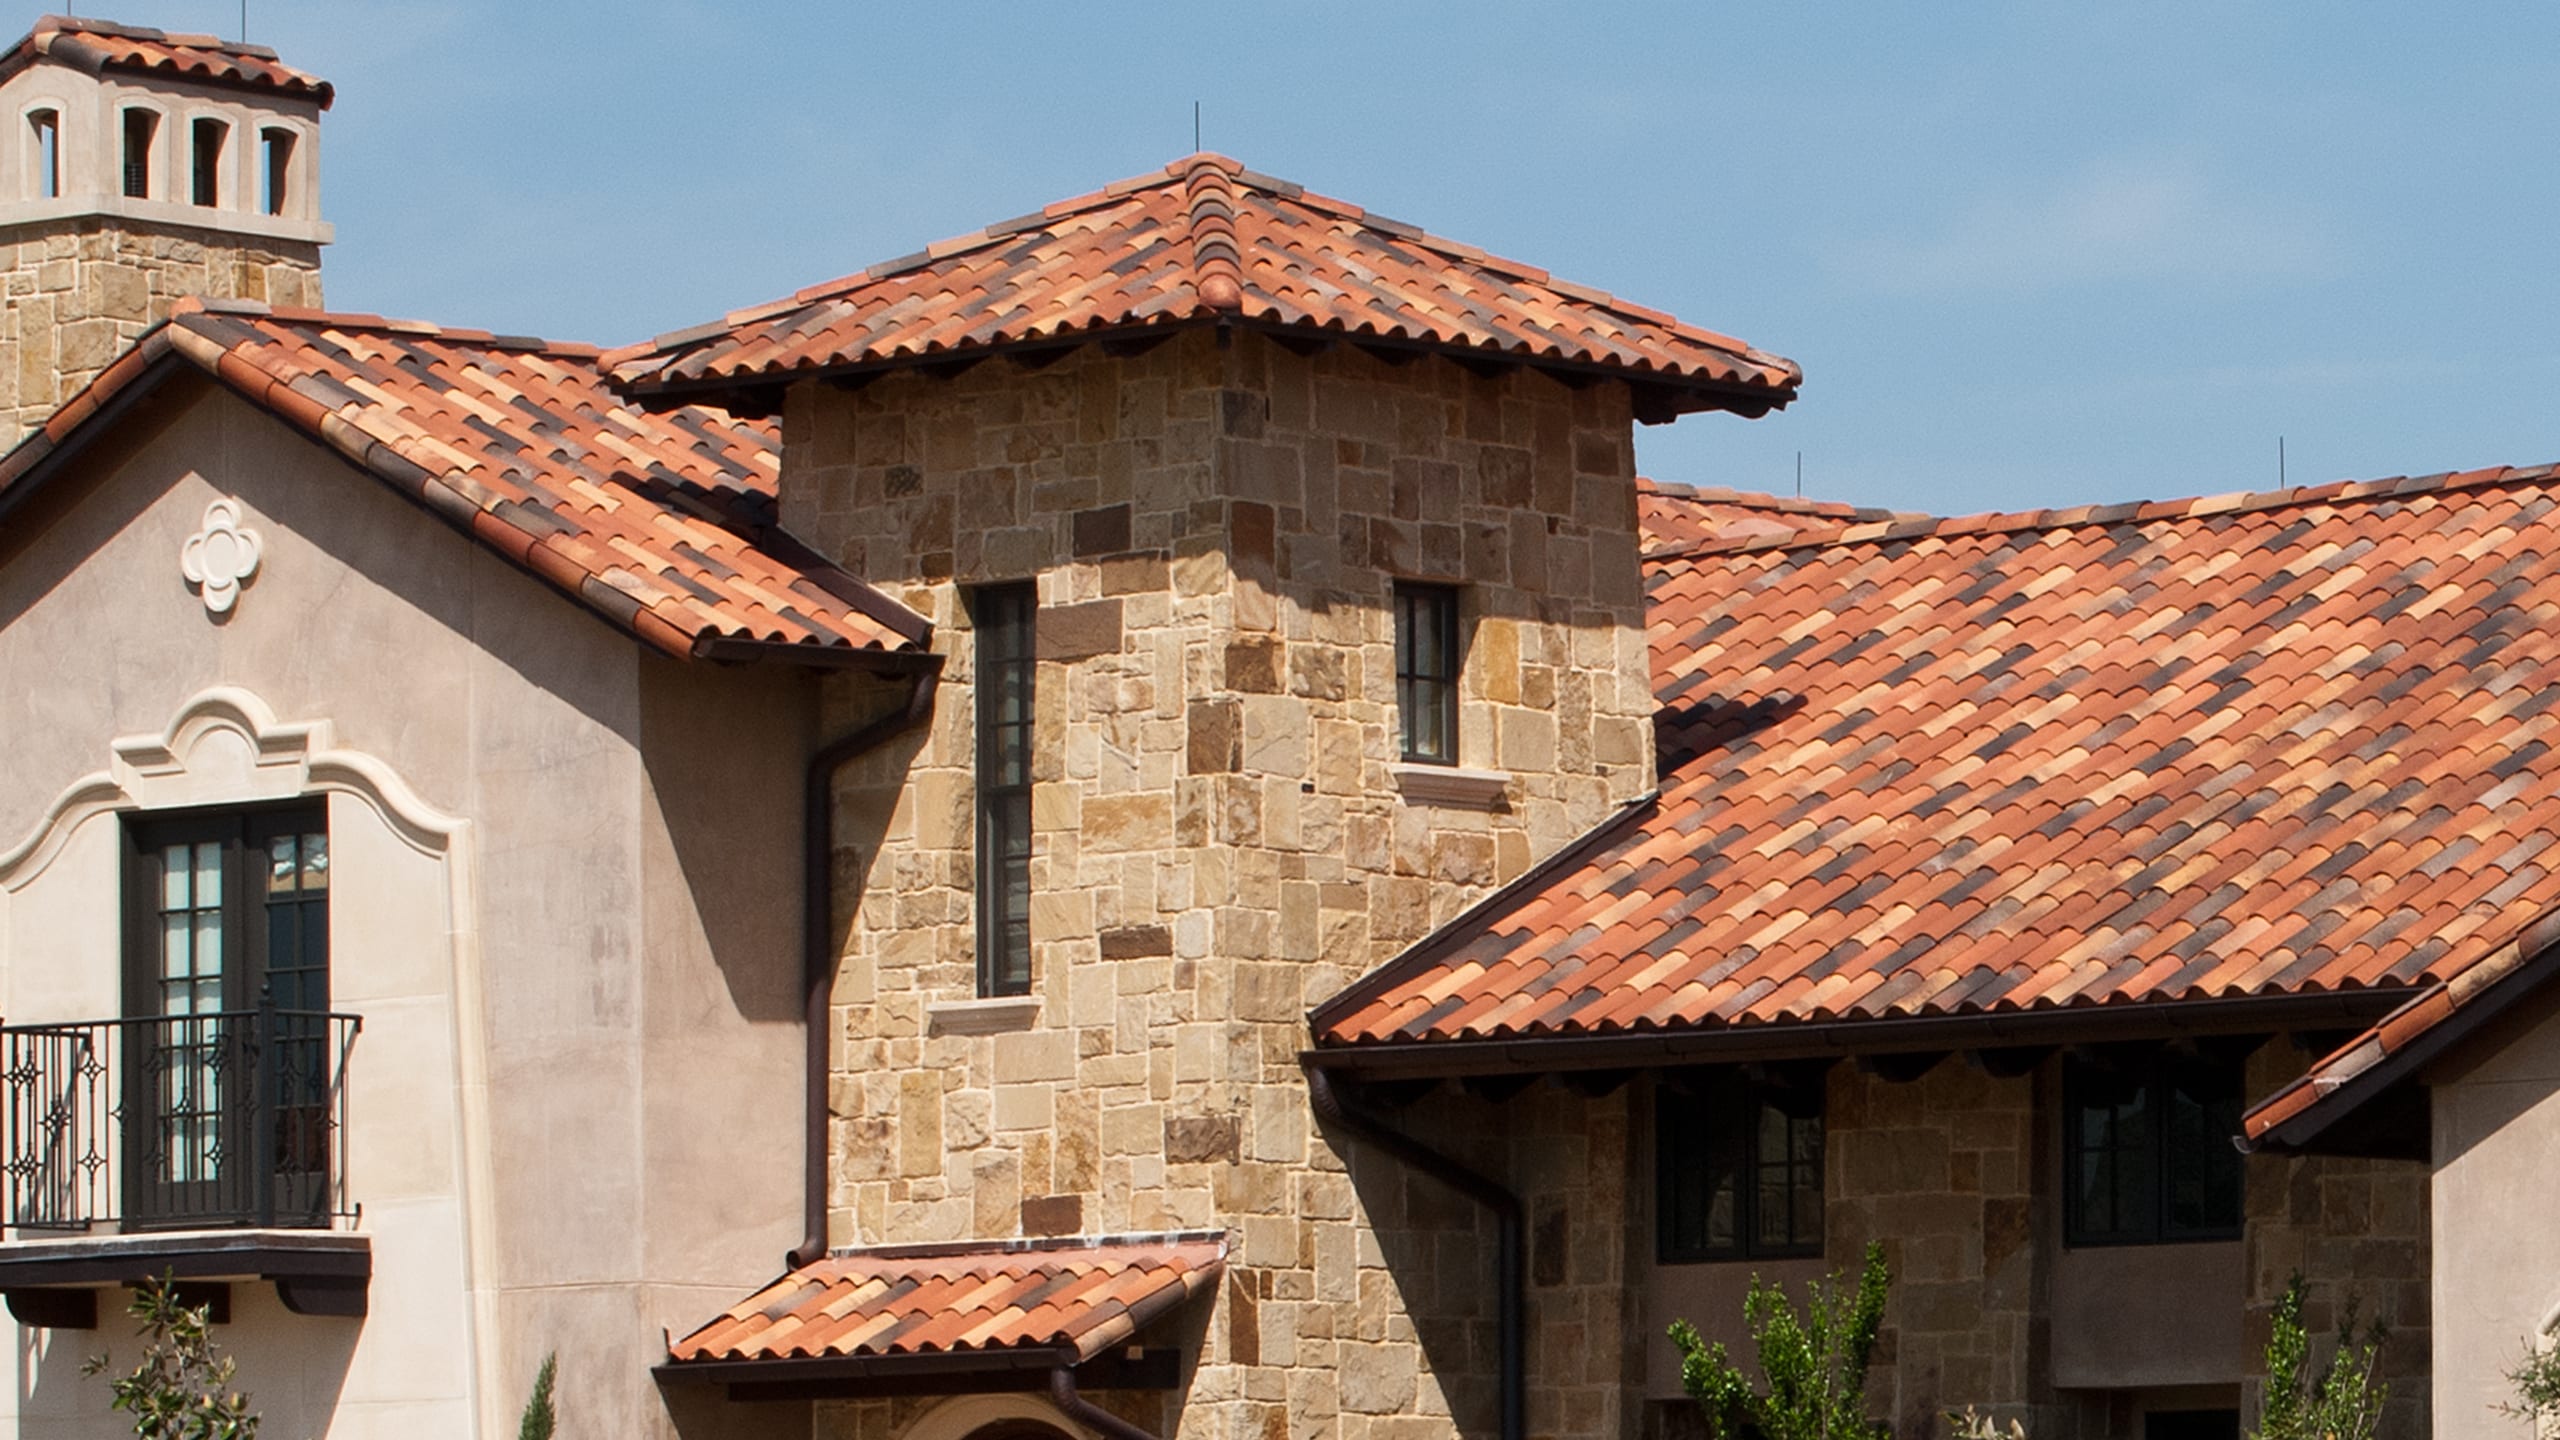 Private Residence in Fort Worth Featuring Ludowici Spanish Clay Roof Tile